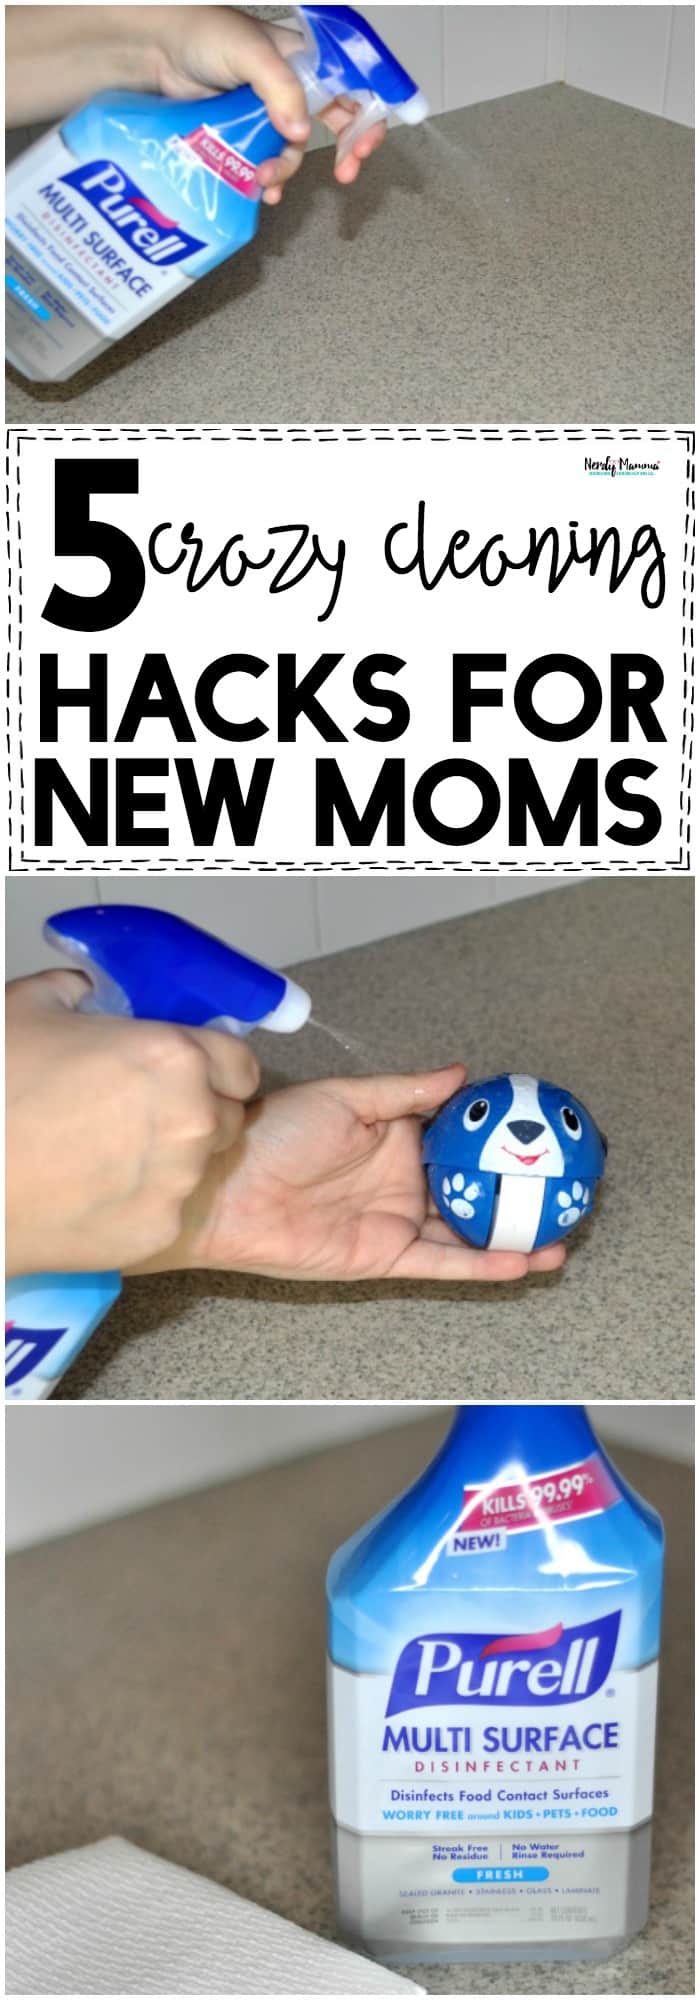 These 5 cleaning hacks for new moms are seriously amazing! Life-Freaking-Changing.